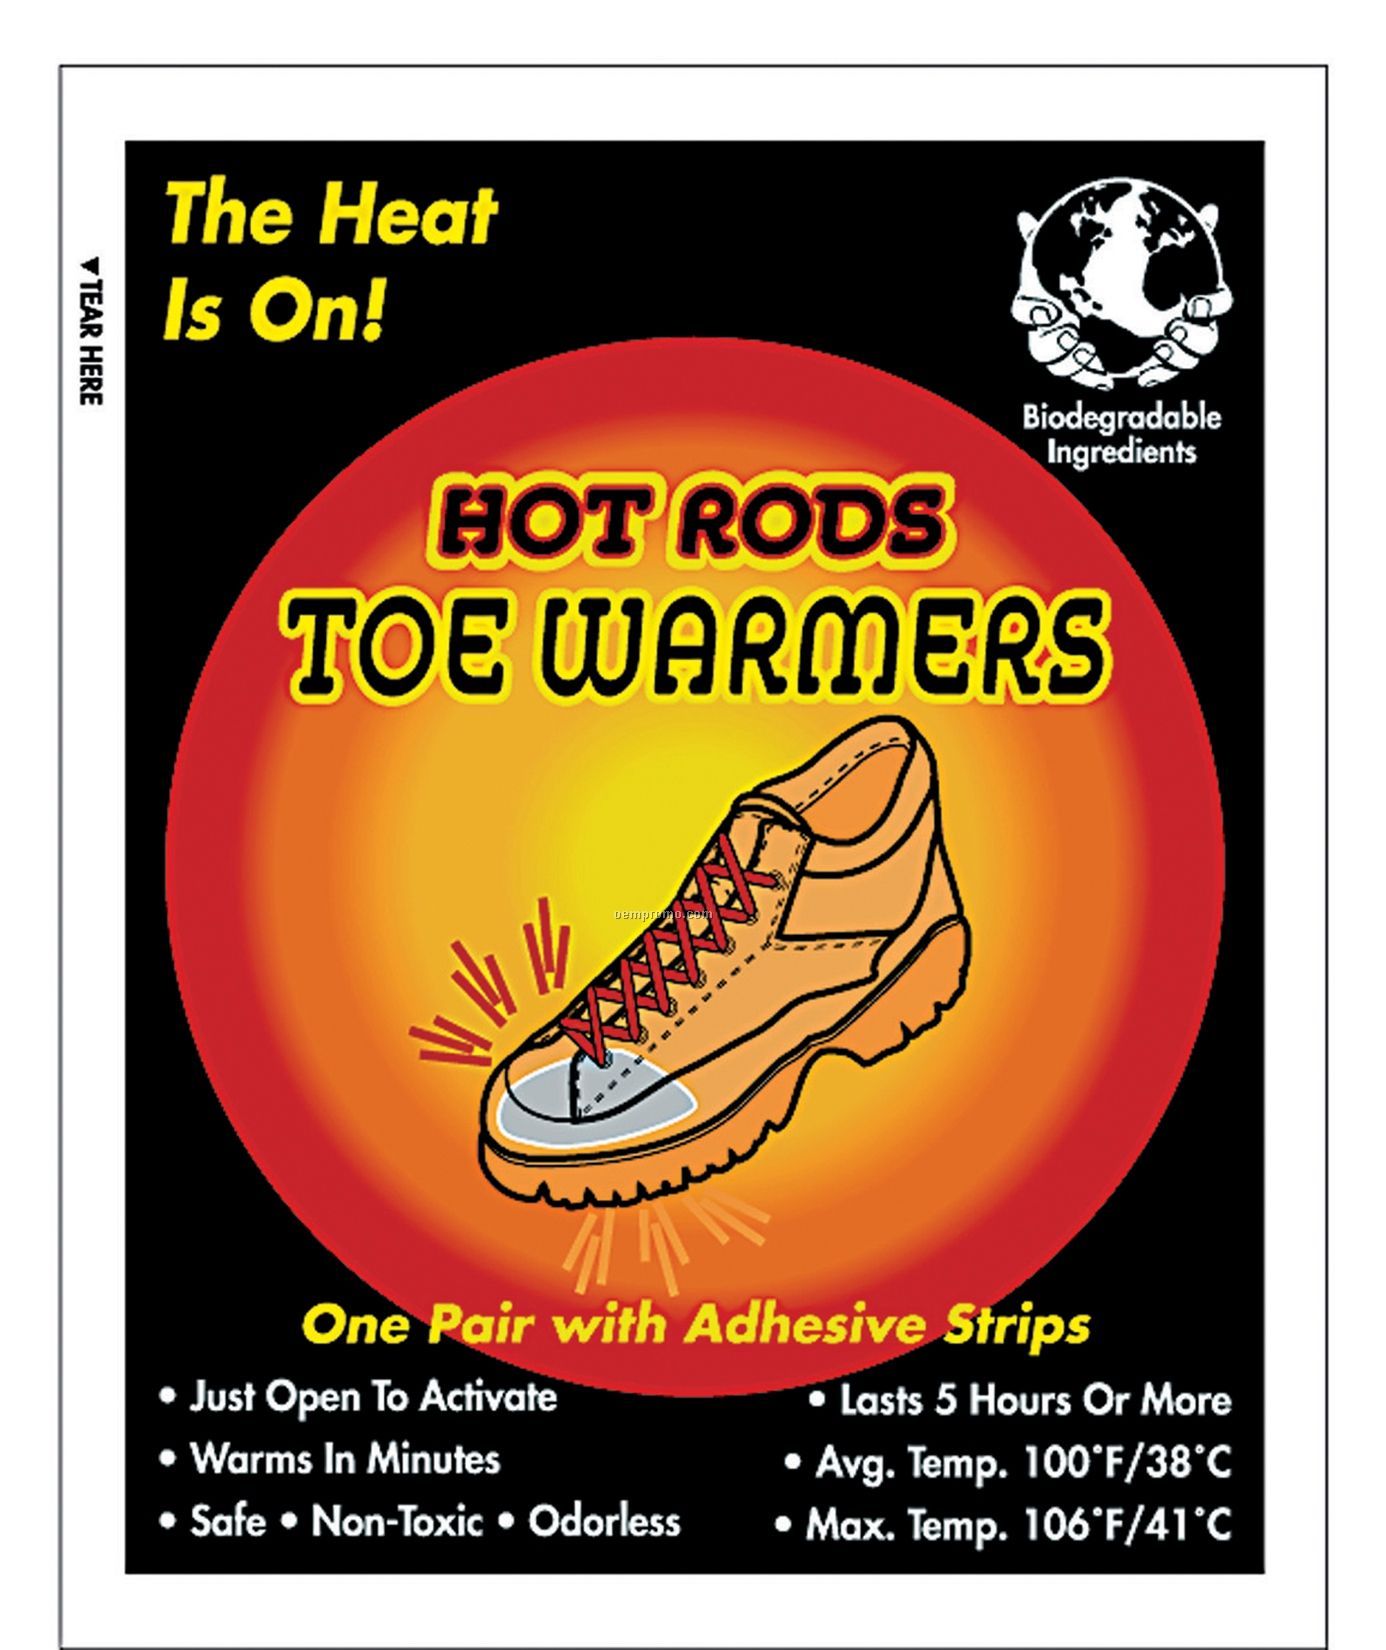 Hot Rods Warming Pack Display W/ 40 Pair - Toe Warmers